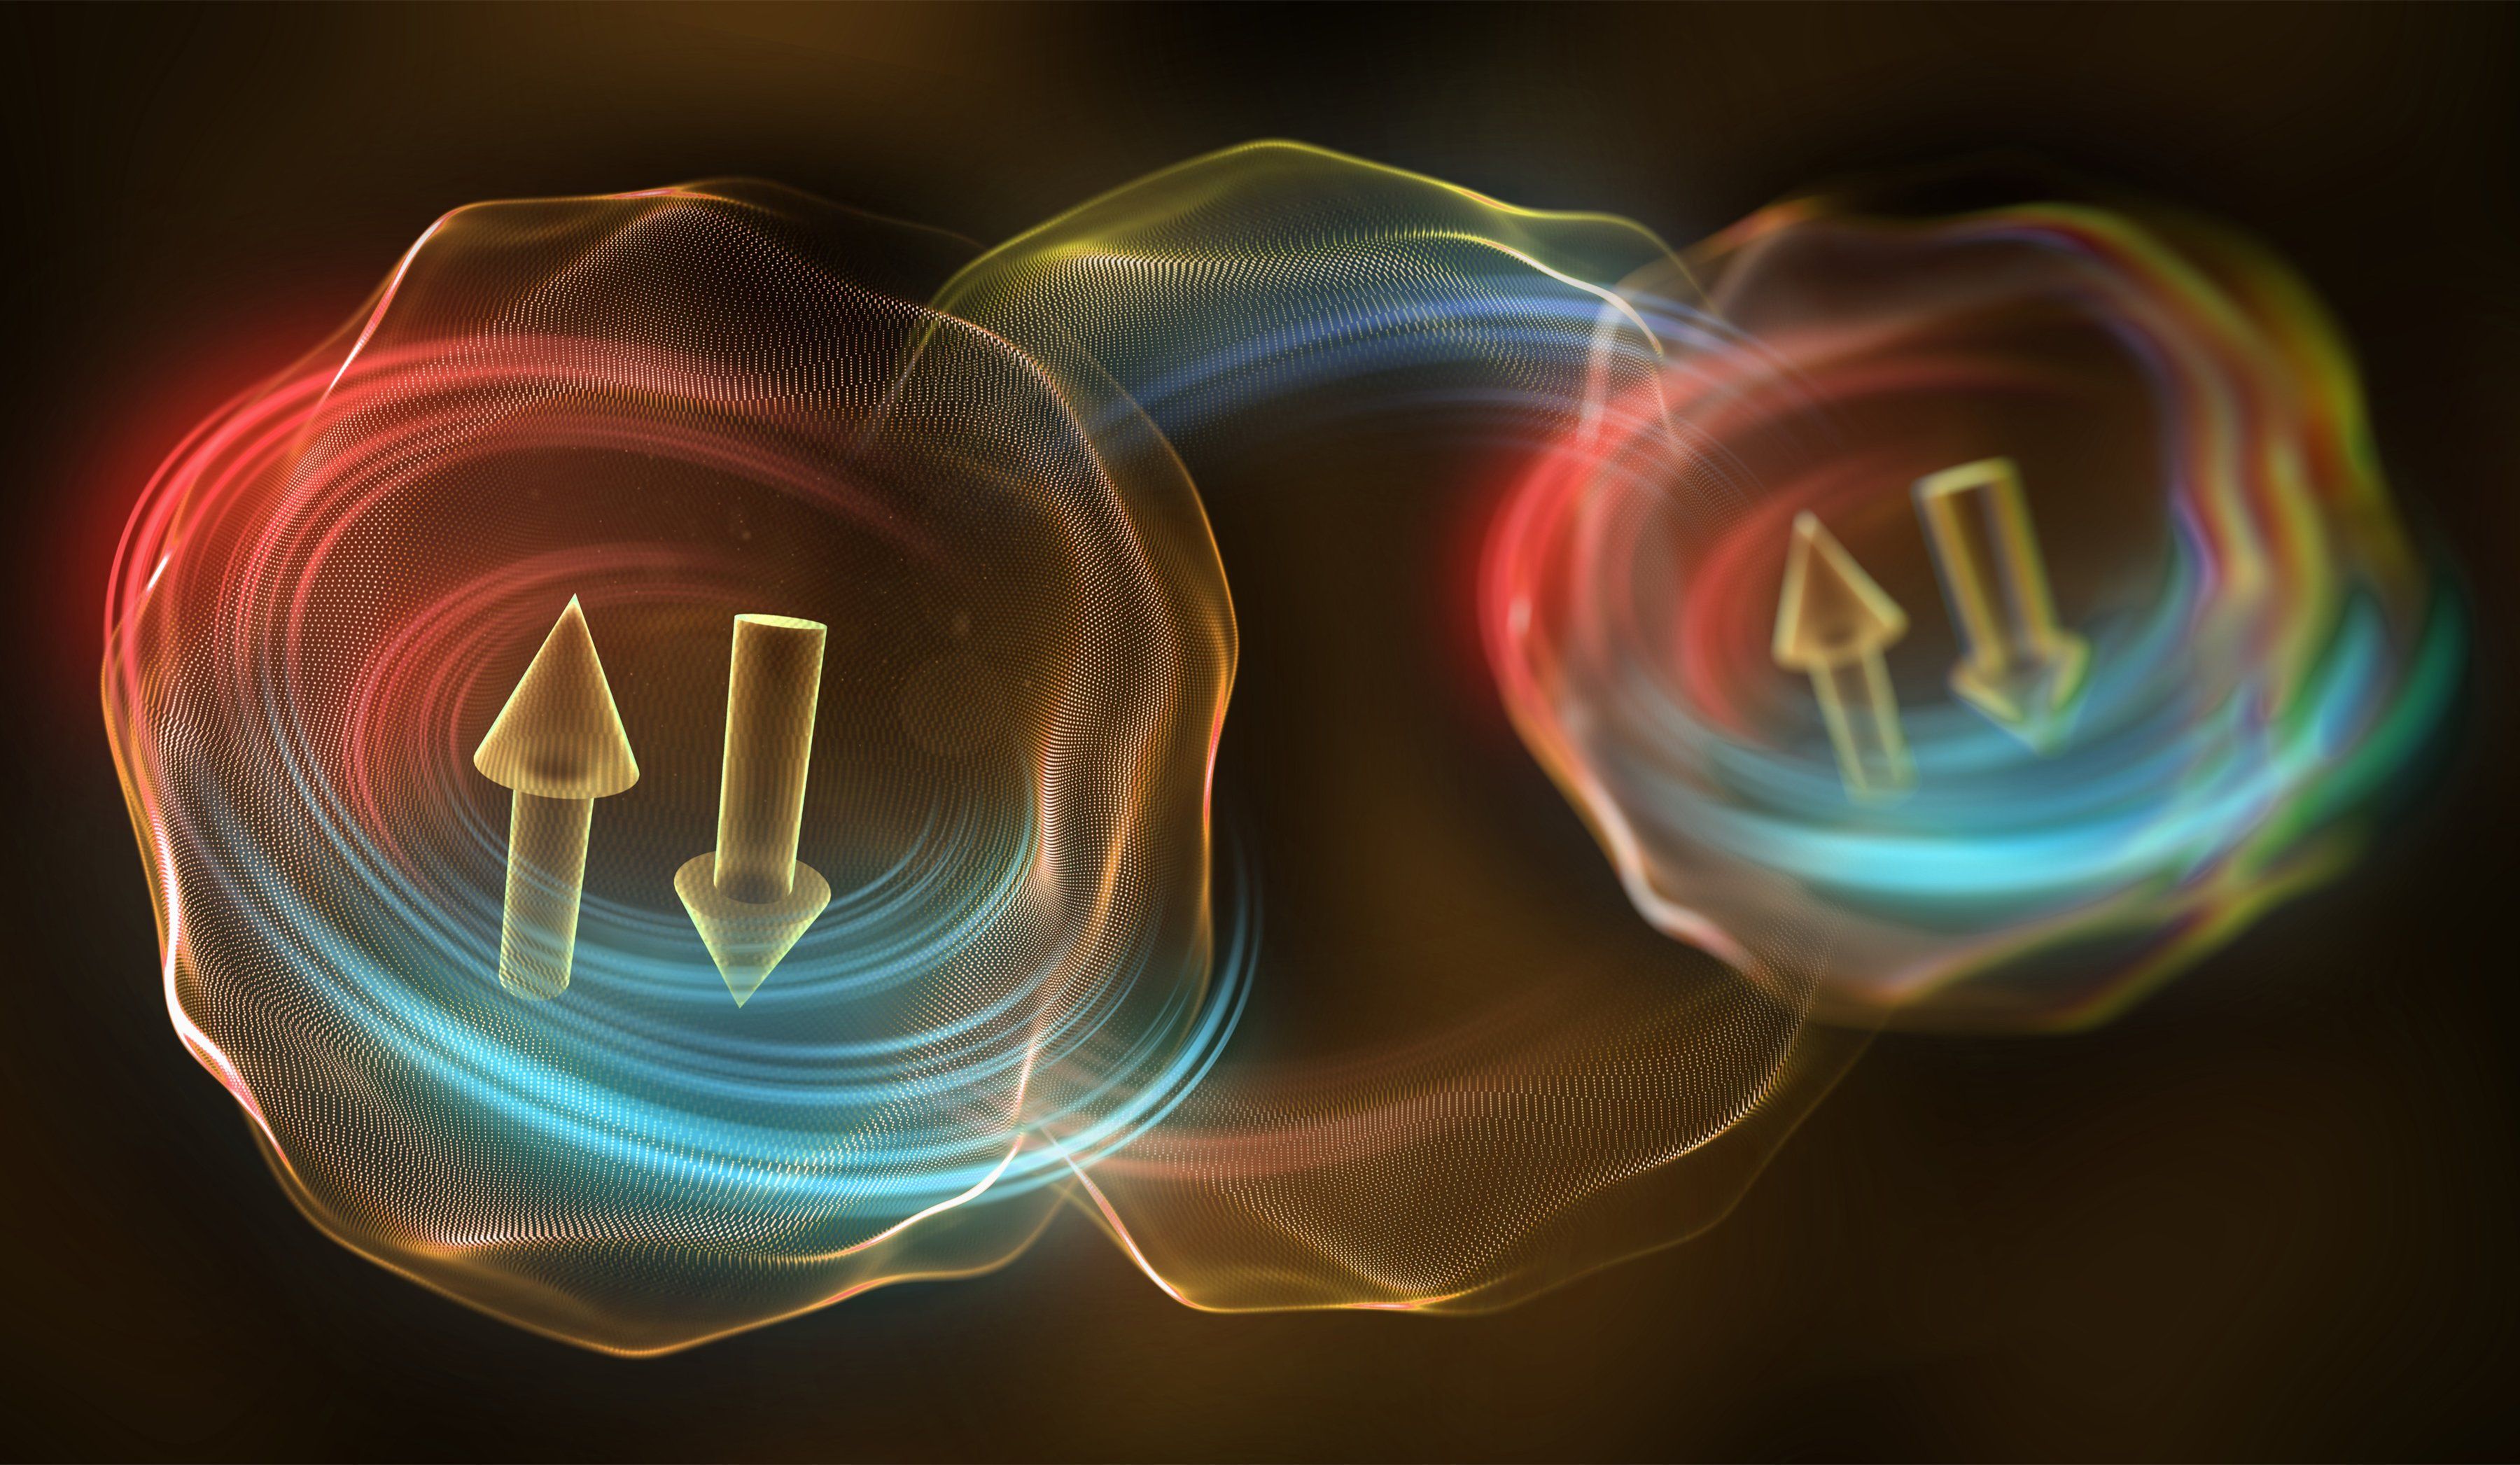 Conceptual illustration of spintronics, visualizing the quantum property of the electron known as spin, wherein every electron spin is oriented in one of only two directions, up or down. 